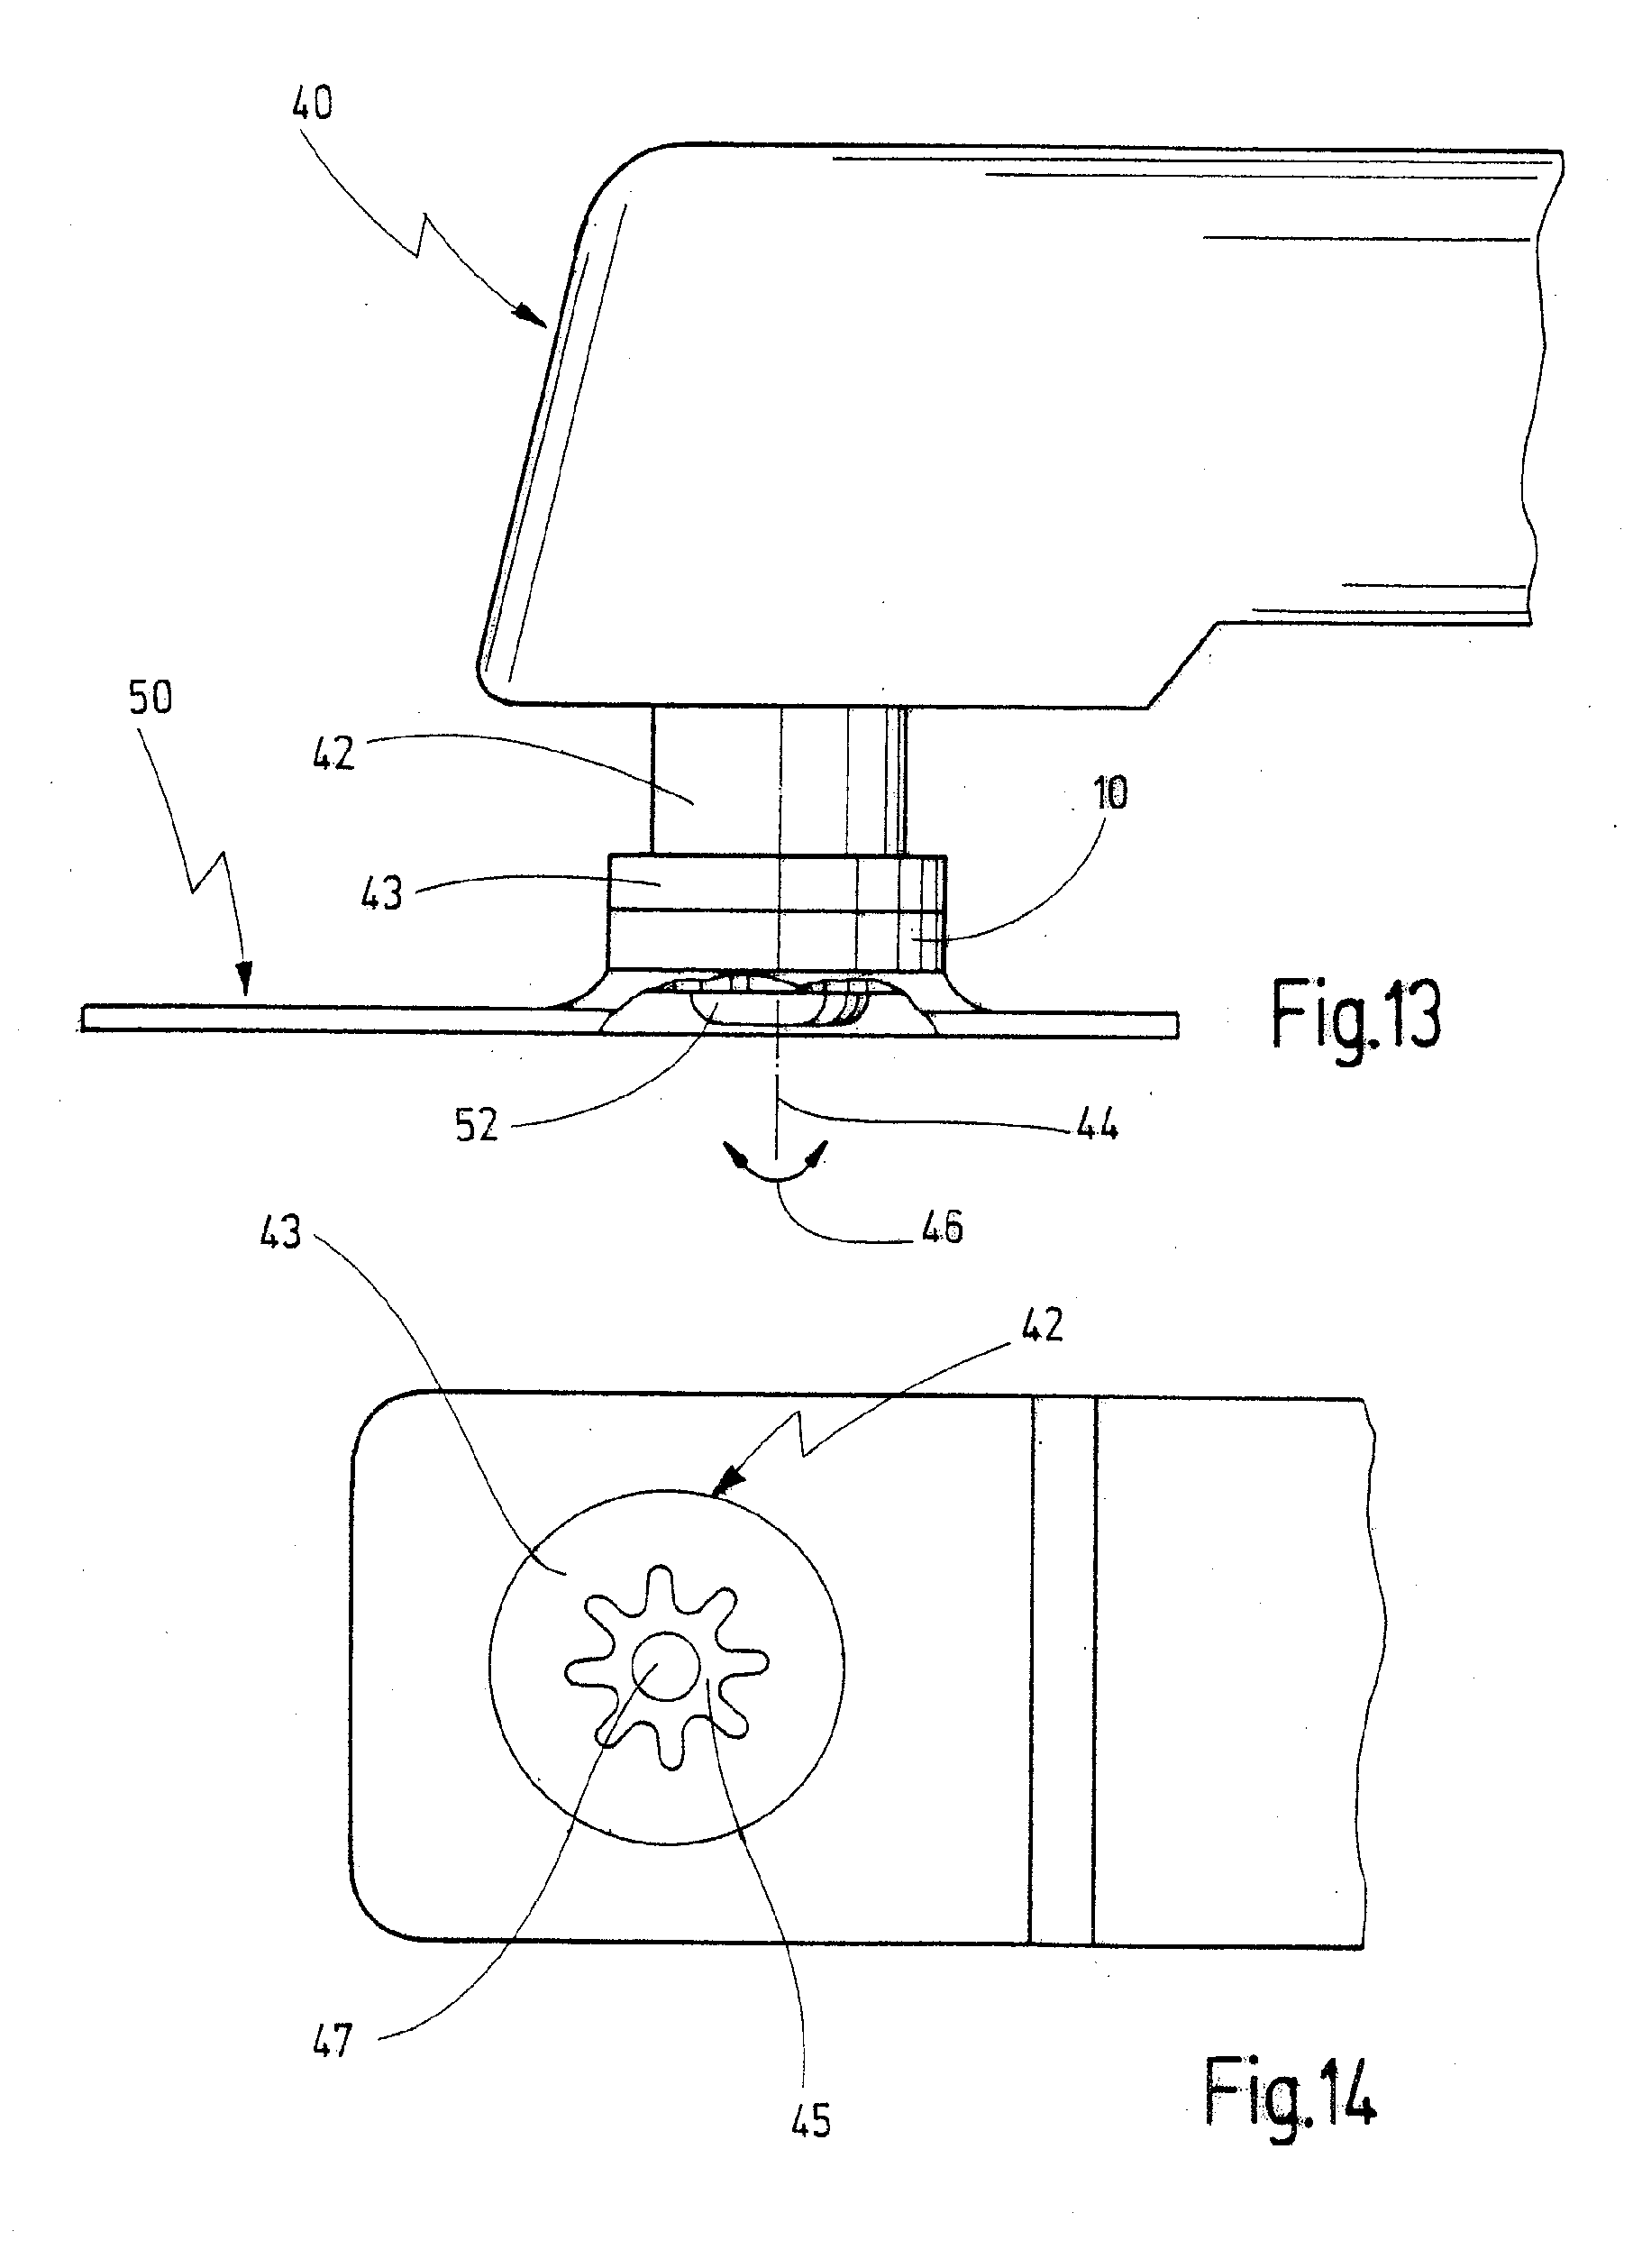 Adapter For Mounting A Tool On An Oscillating Drive